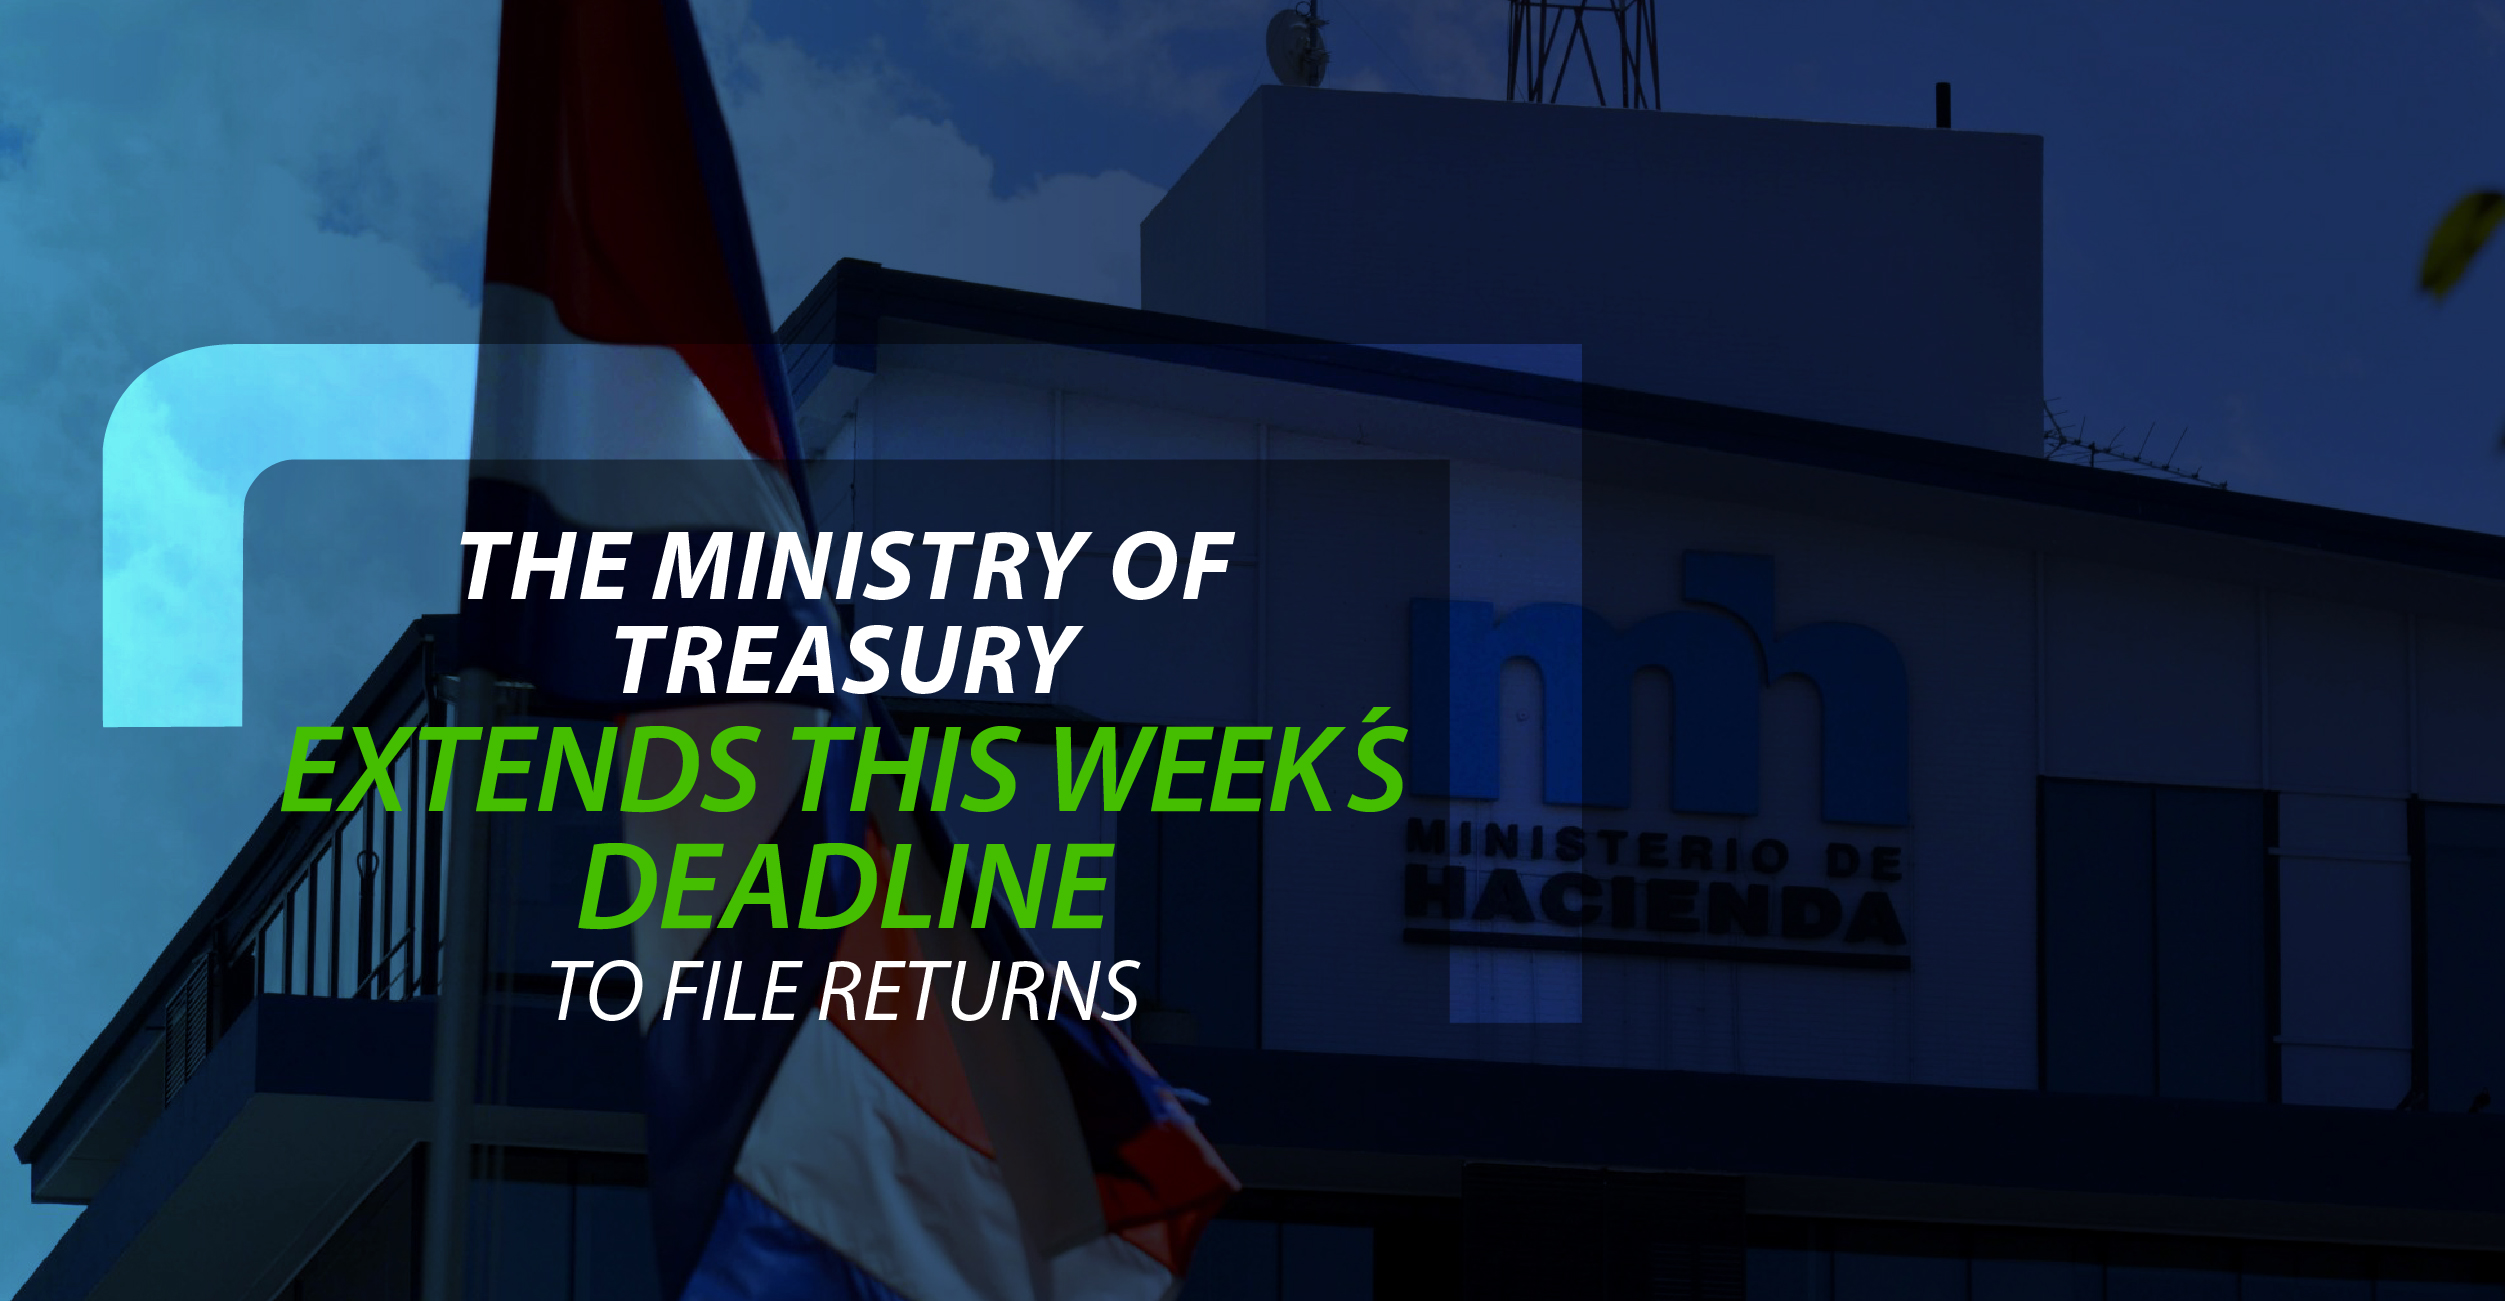 The Ministry of Treasury extends this week´s deadline to file returns